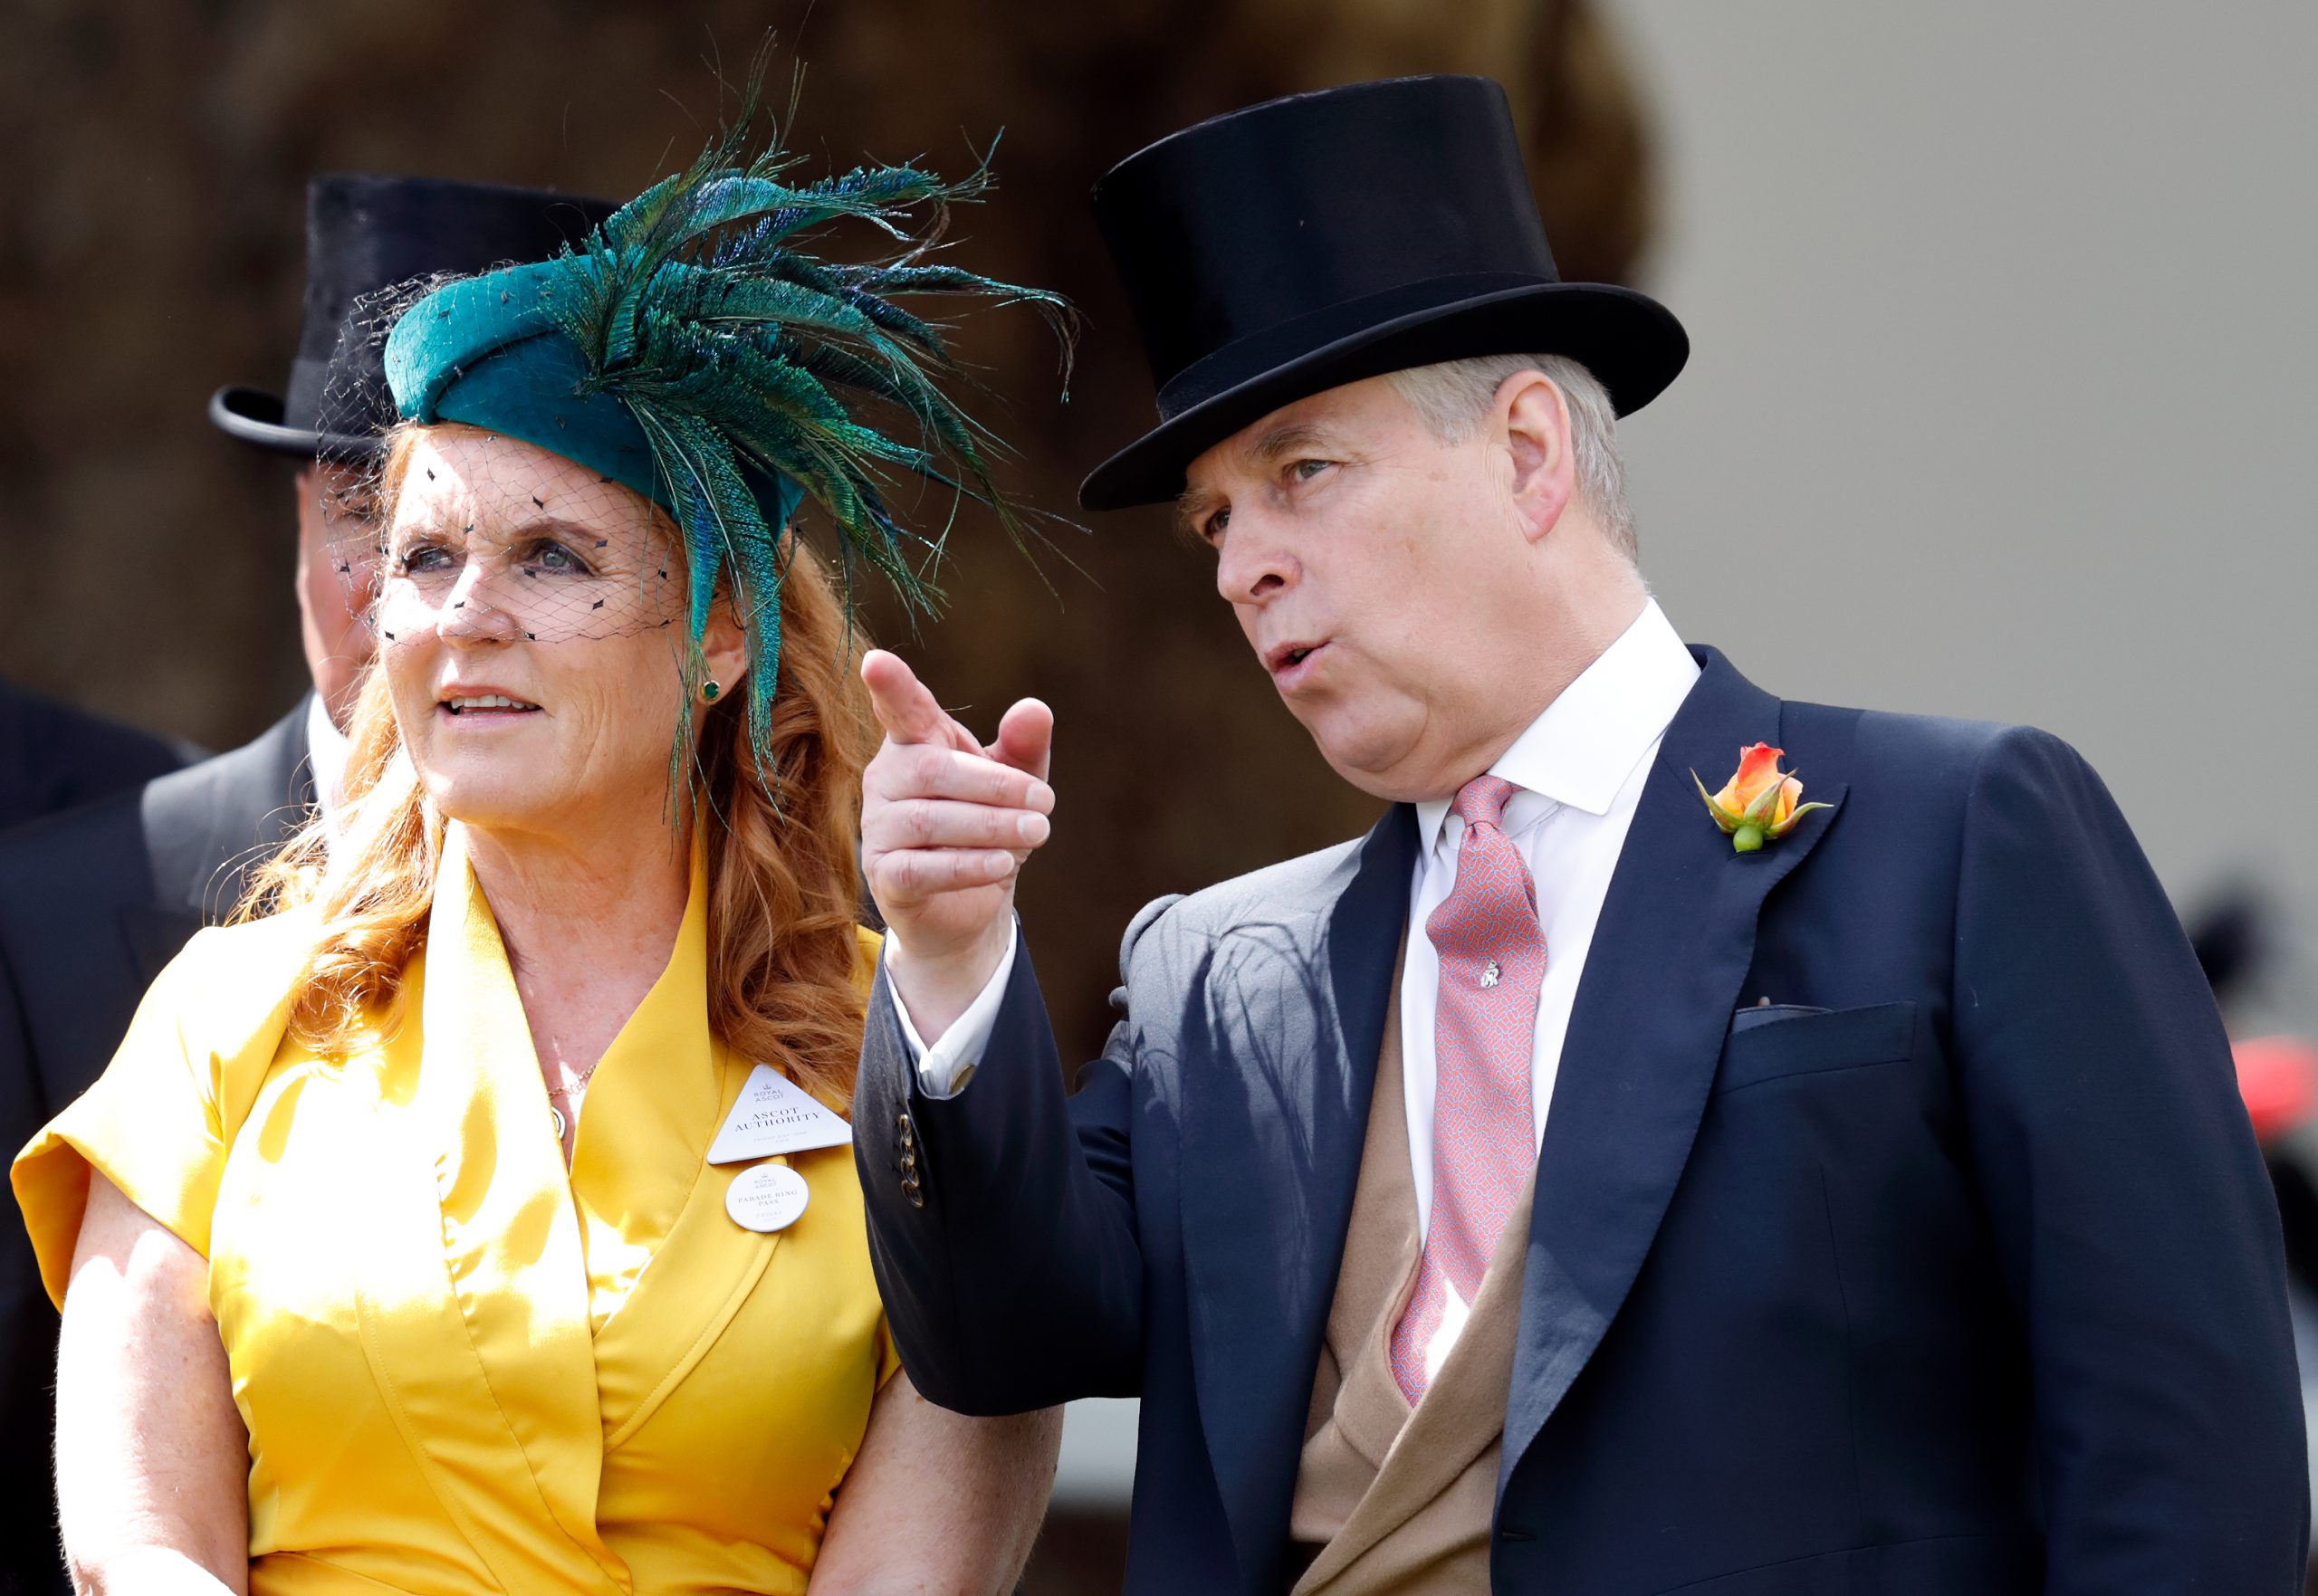 Prince Andrew And Sarah Ferguson Pictured For The First Time Since He